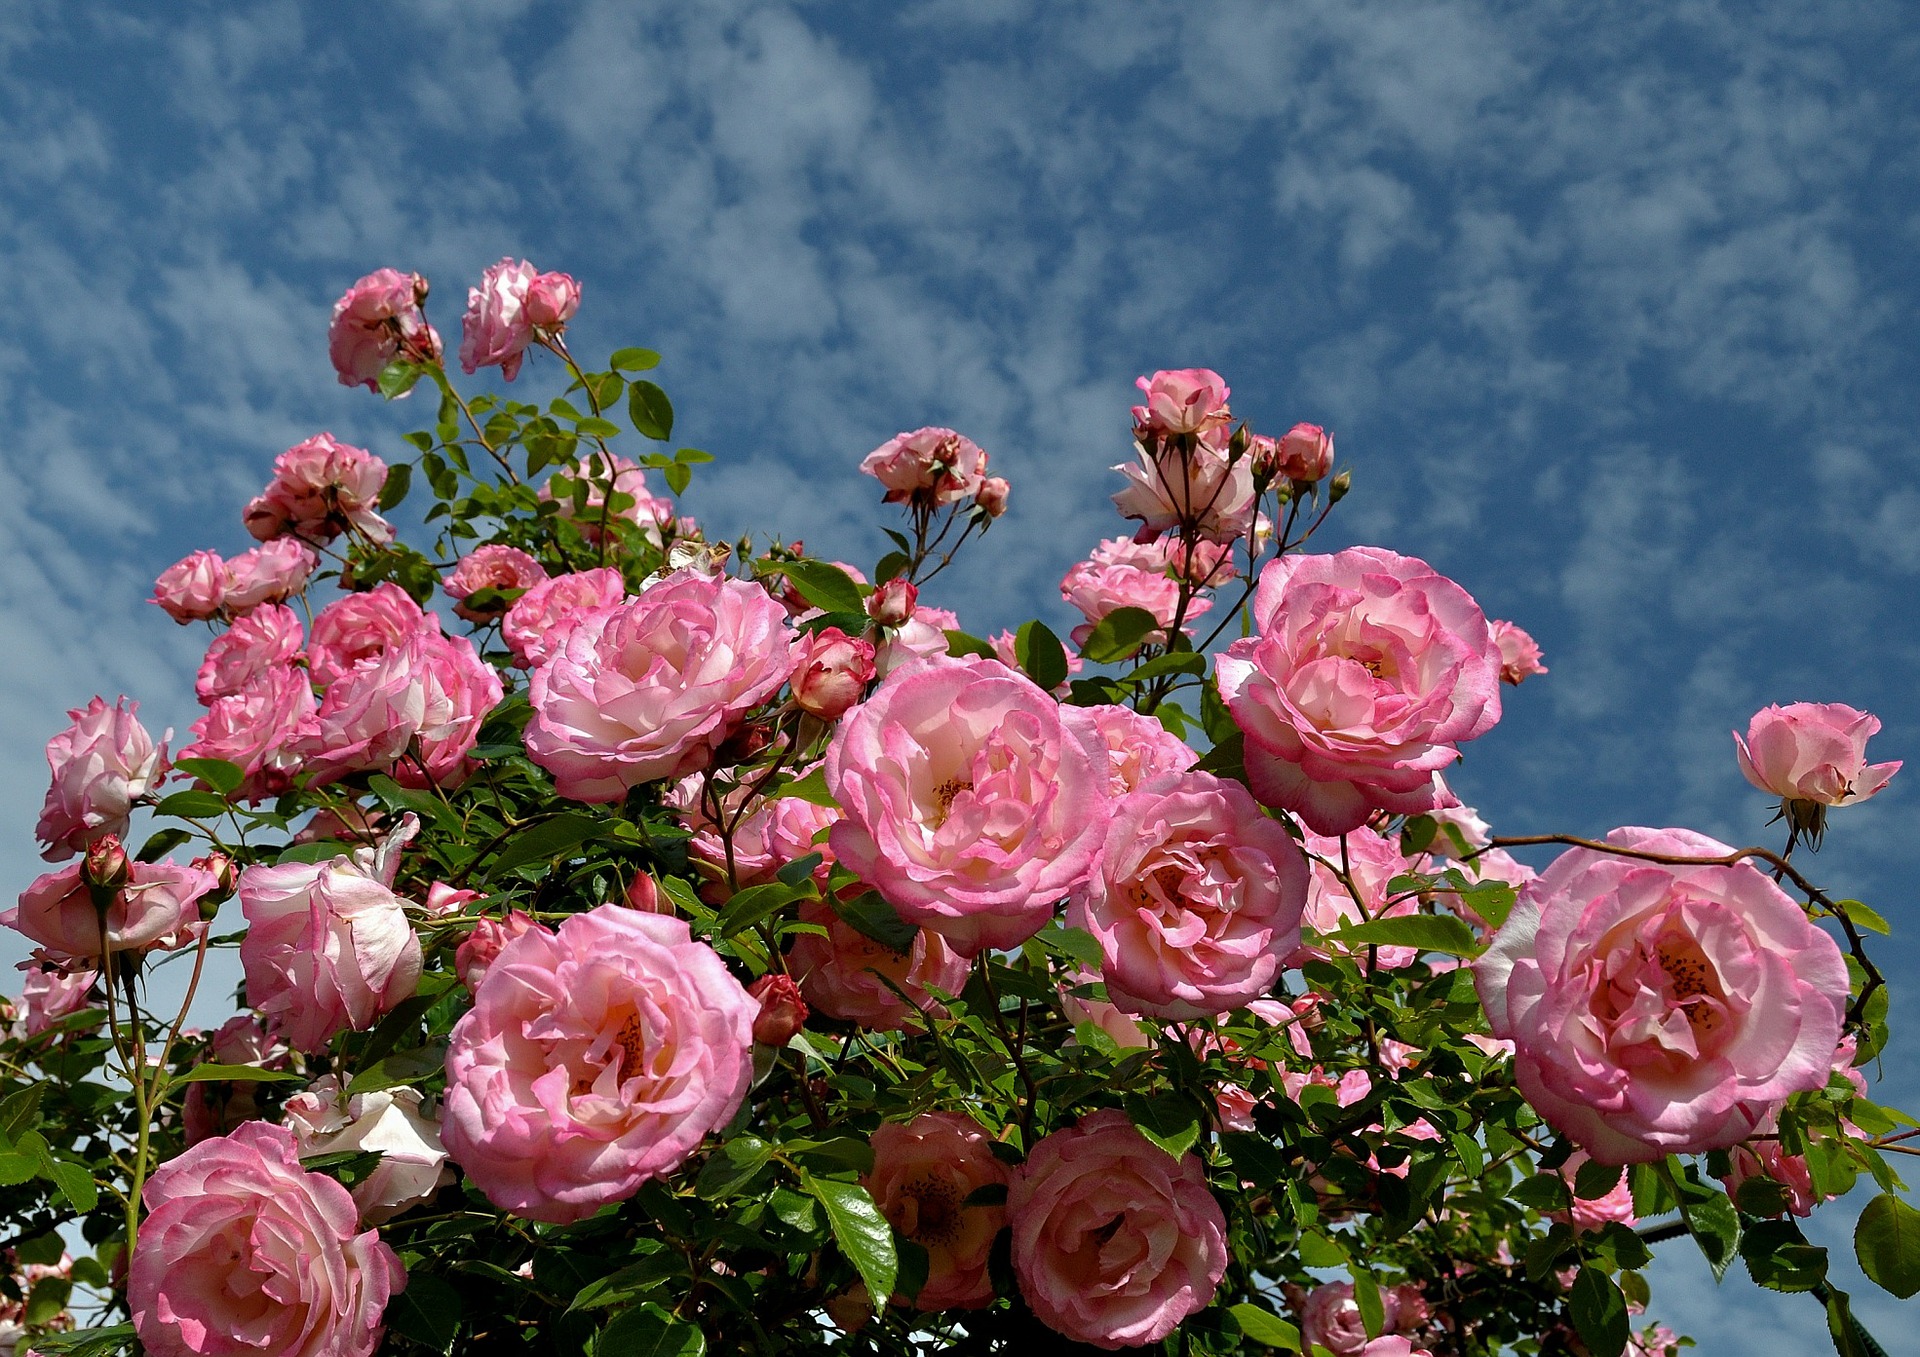 roses-g7be5b81a8_1920